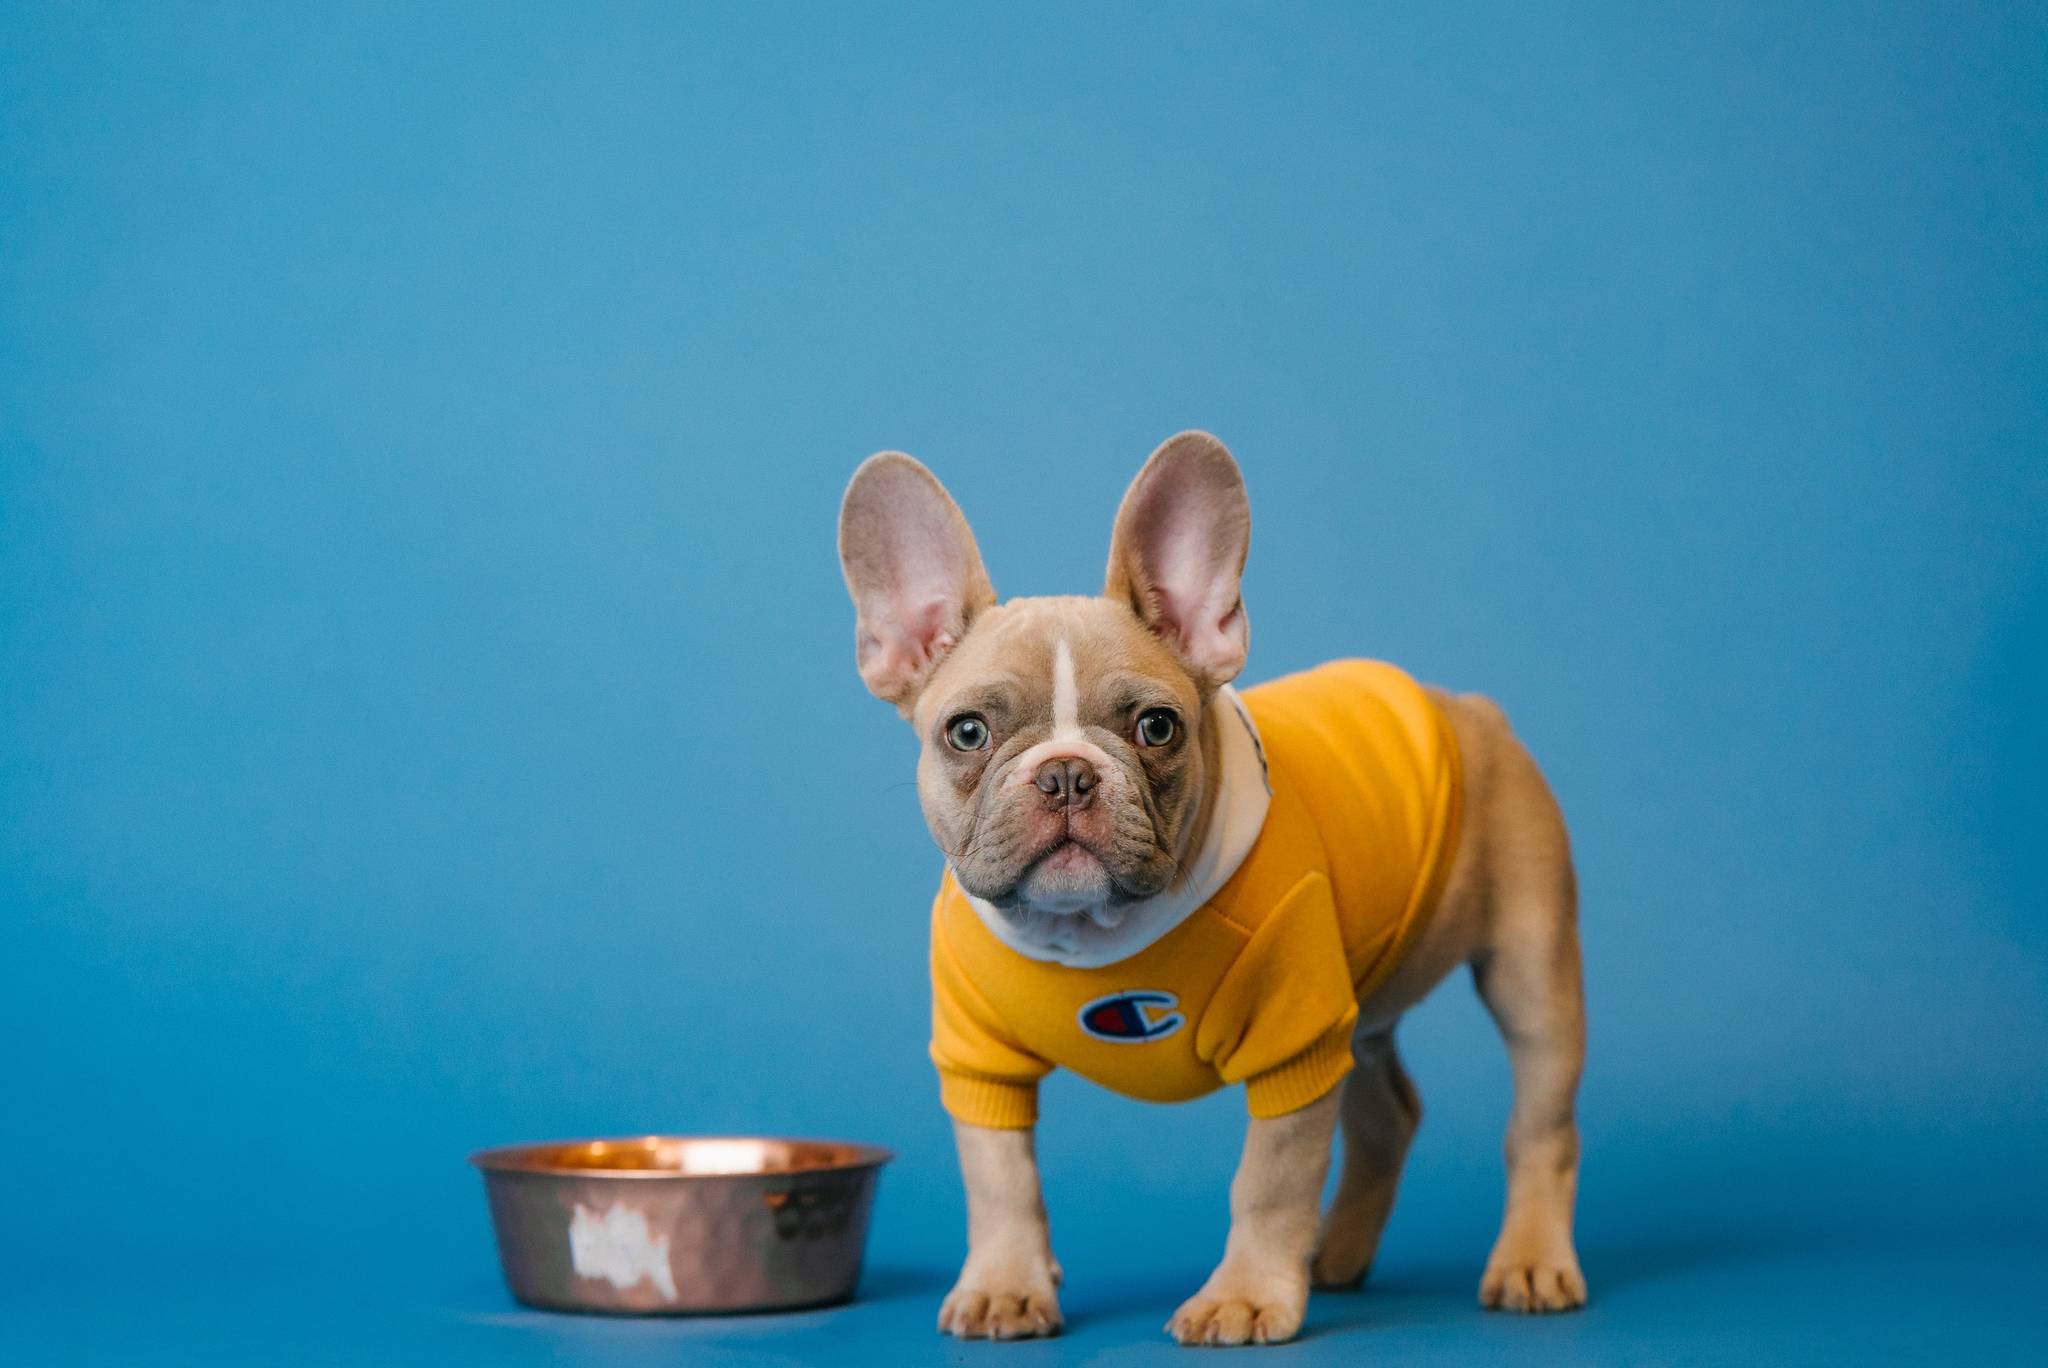 Pet food subscription box offers fresh and natural meals